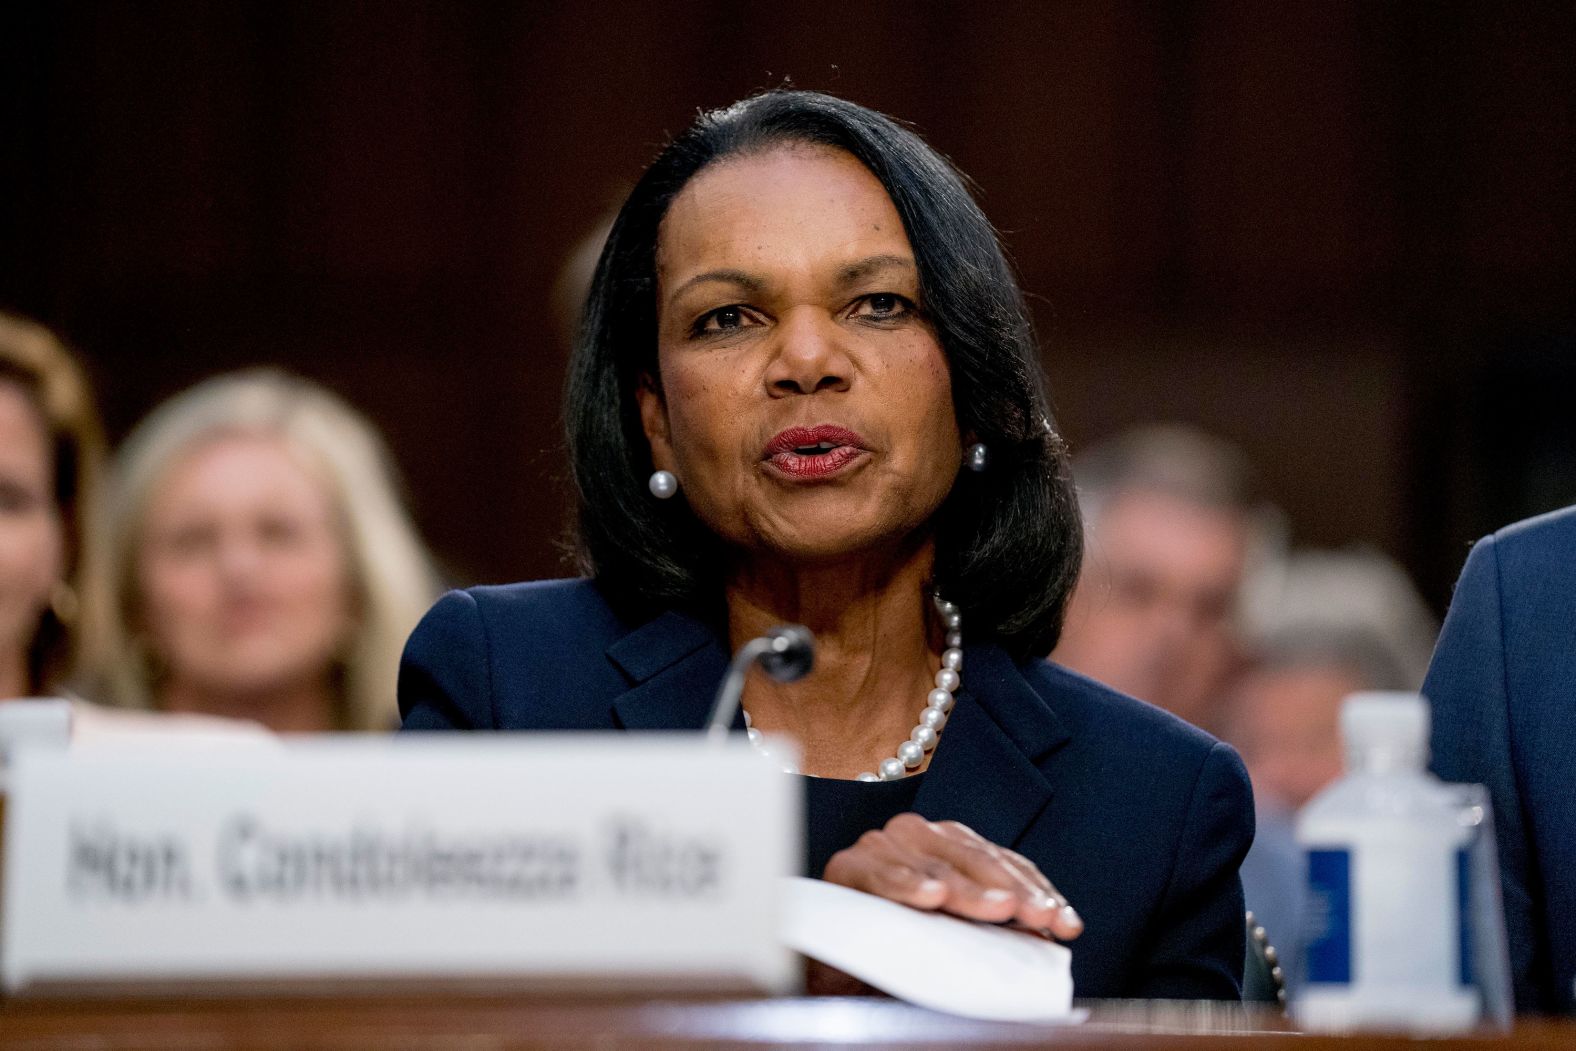 Former Secretary of State Condoleezza Rice introduces Kavanaugh as he appears before the Senate Judiciary Committee on Tuesday.